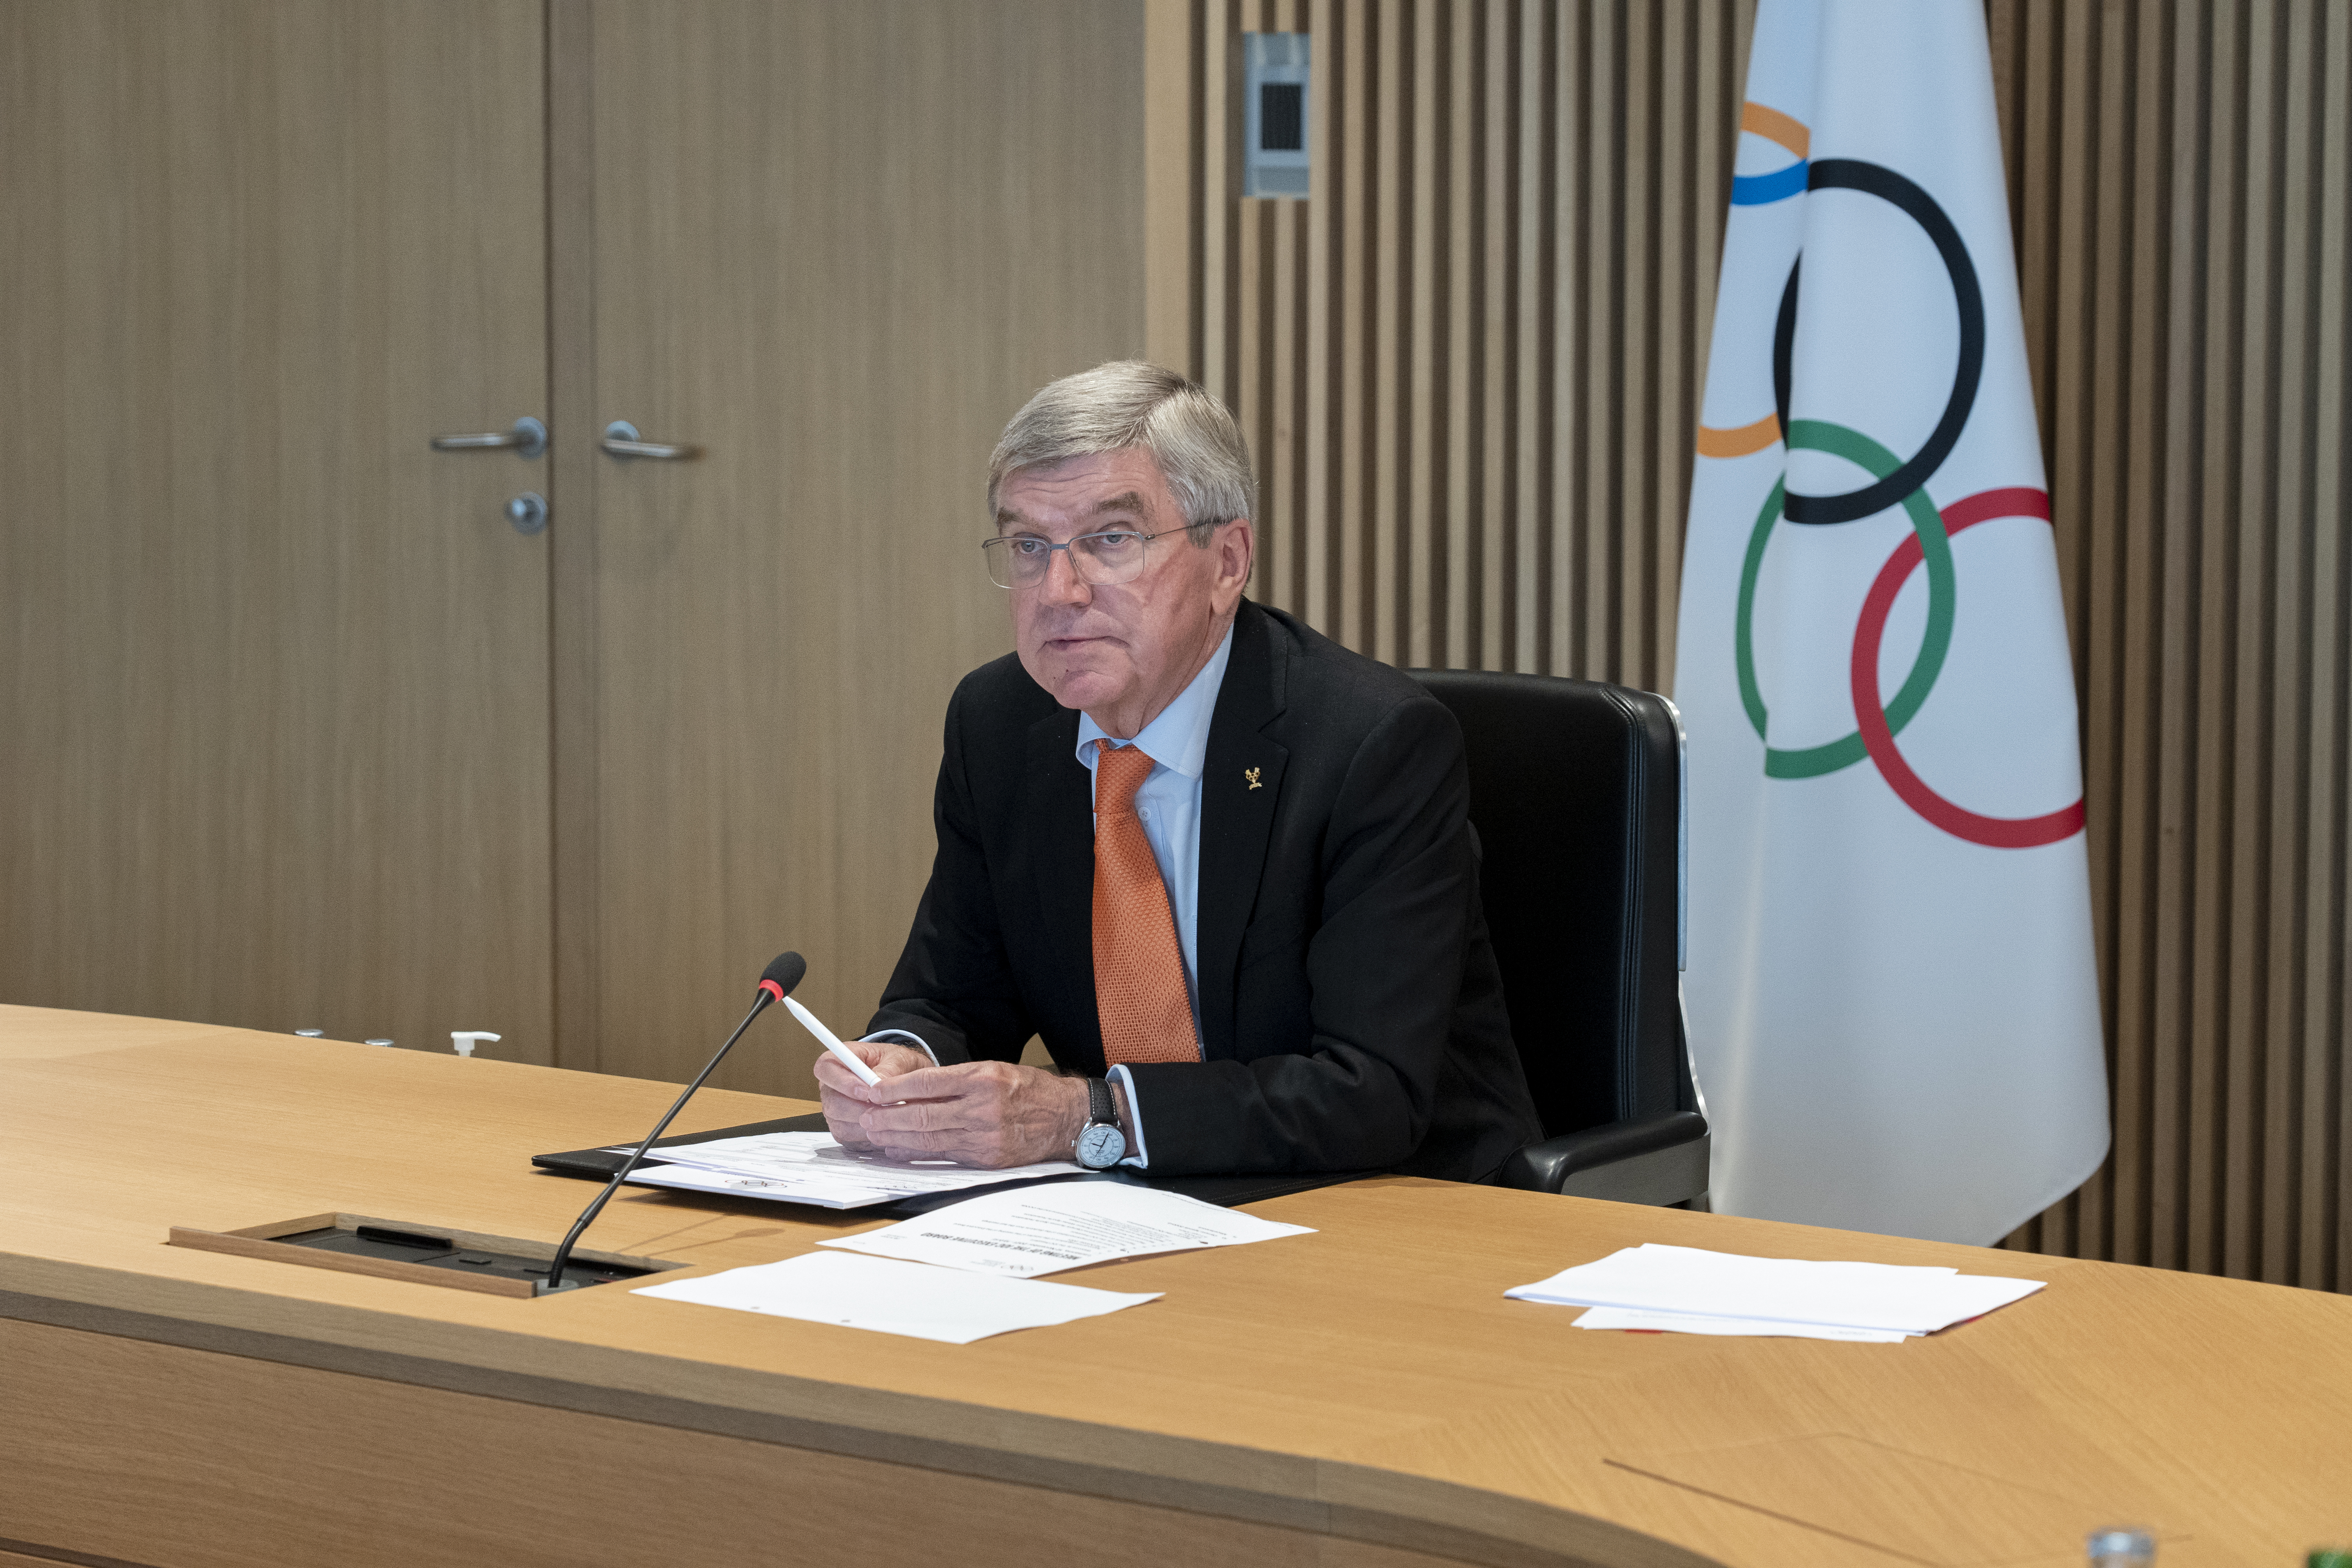 Lausanne | SwitzerlandIOC President, Thomas Bach holds an executive board meeting during the commission weekPhotograph by IOC/Greg Martin